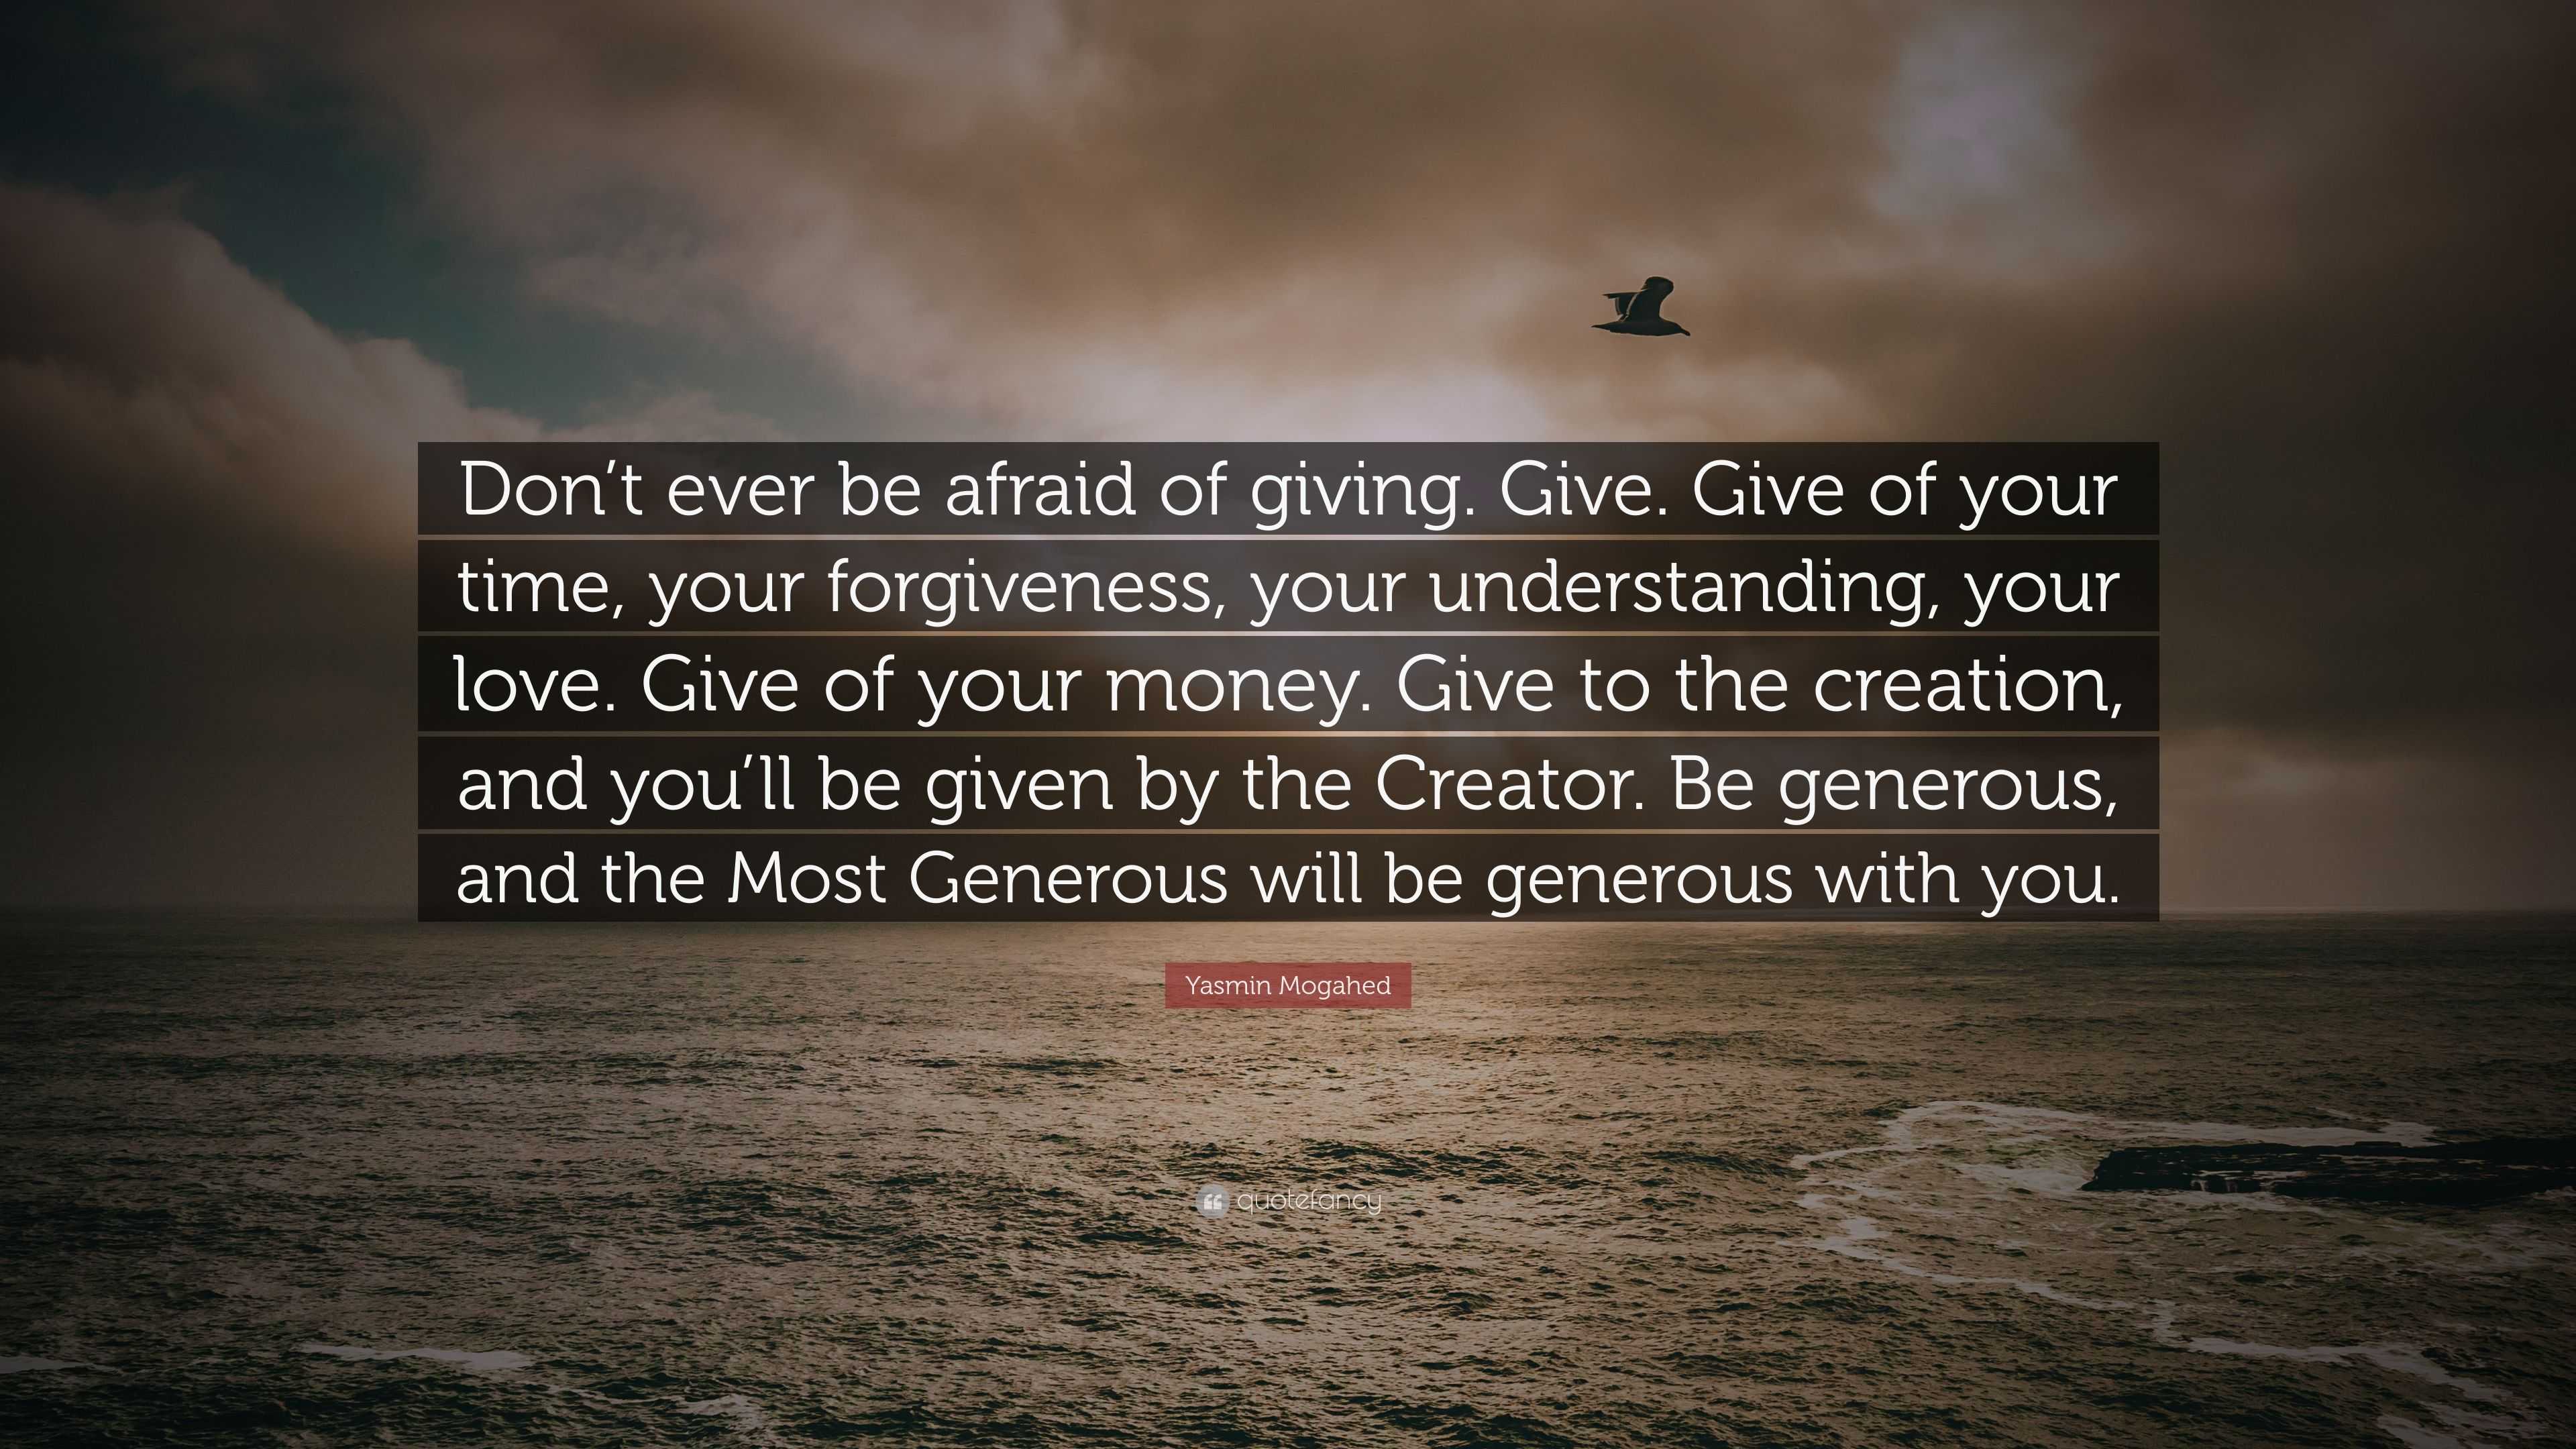 Yasmin Mogahed Quote “Don t ever be afraid of giving Give